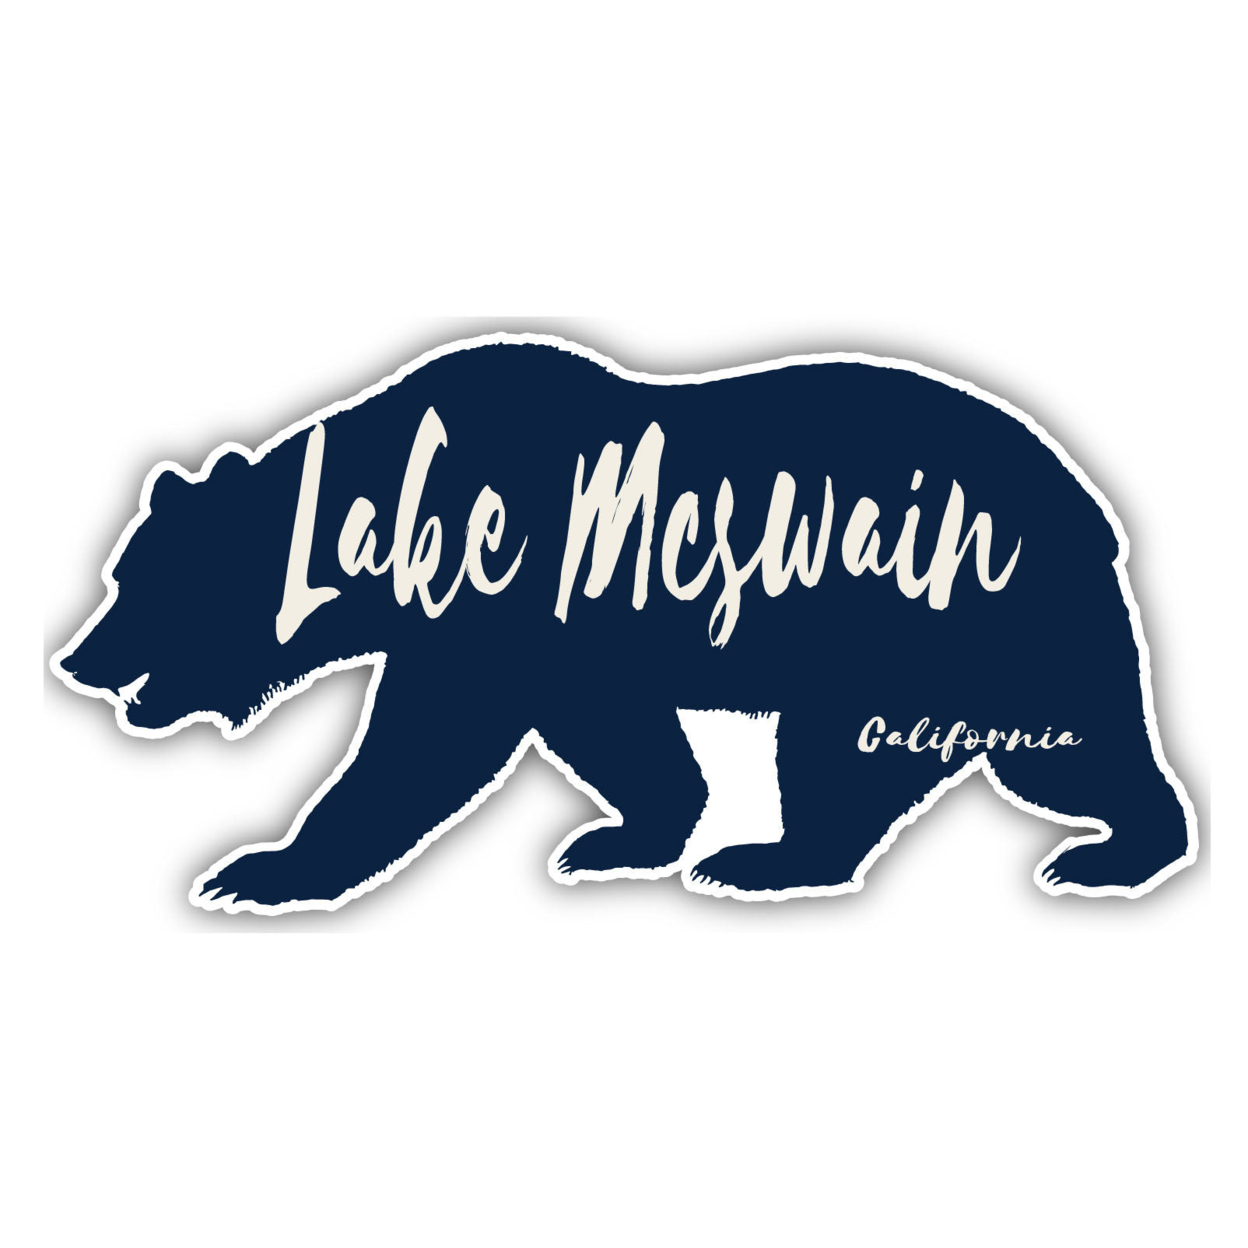 Lake Skinner California Souvenir Decorative Stickers (Choose Theme And Size) - 4-Inch, Tent